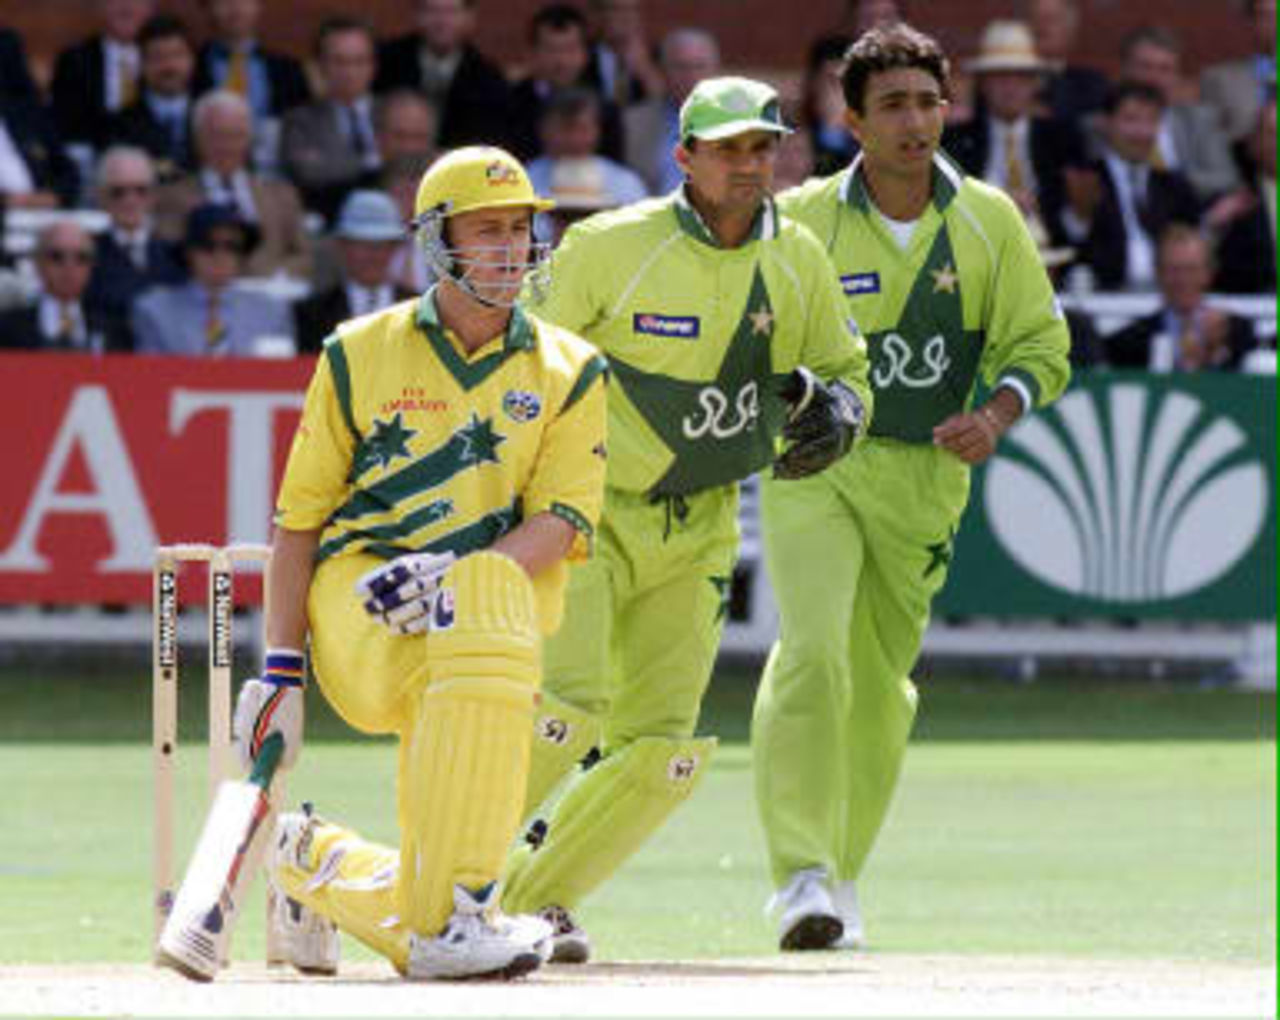 Australia's Adam Gilchrist (Left) stares in disbelief after being caught out by Pakistan`s Inzamam ul-Haq who injured his hand in the process during the World Cup cricket Final at Lords in London. Australia won by eight wickets. 20 June 1999.